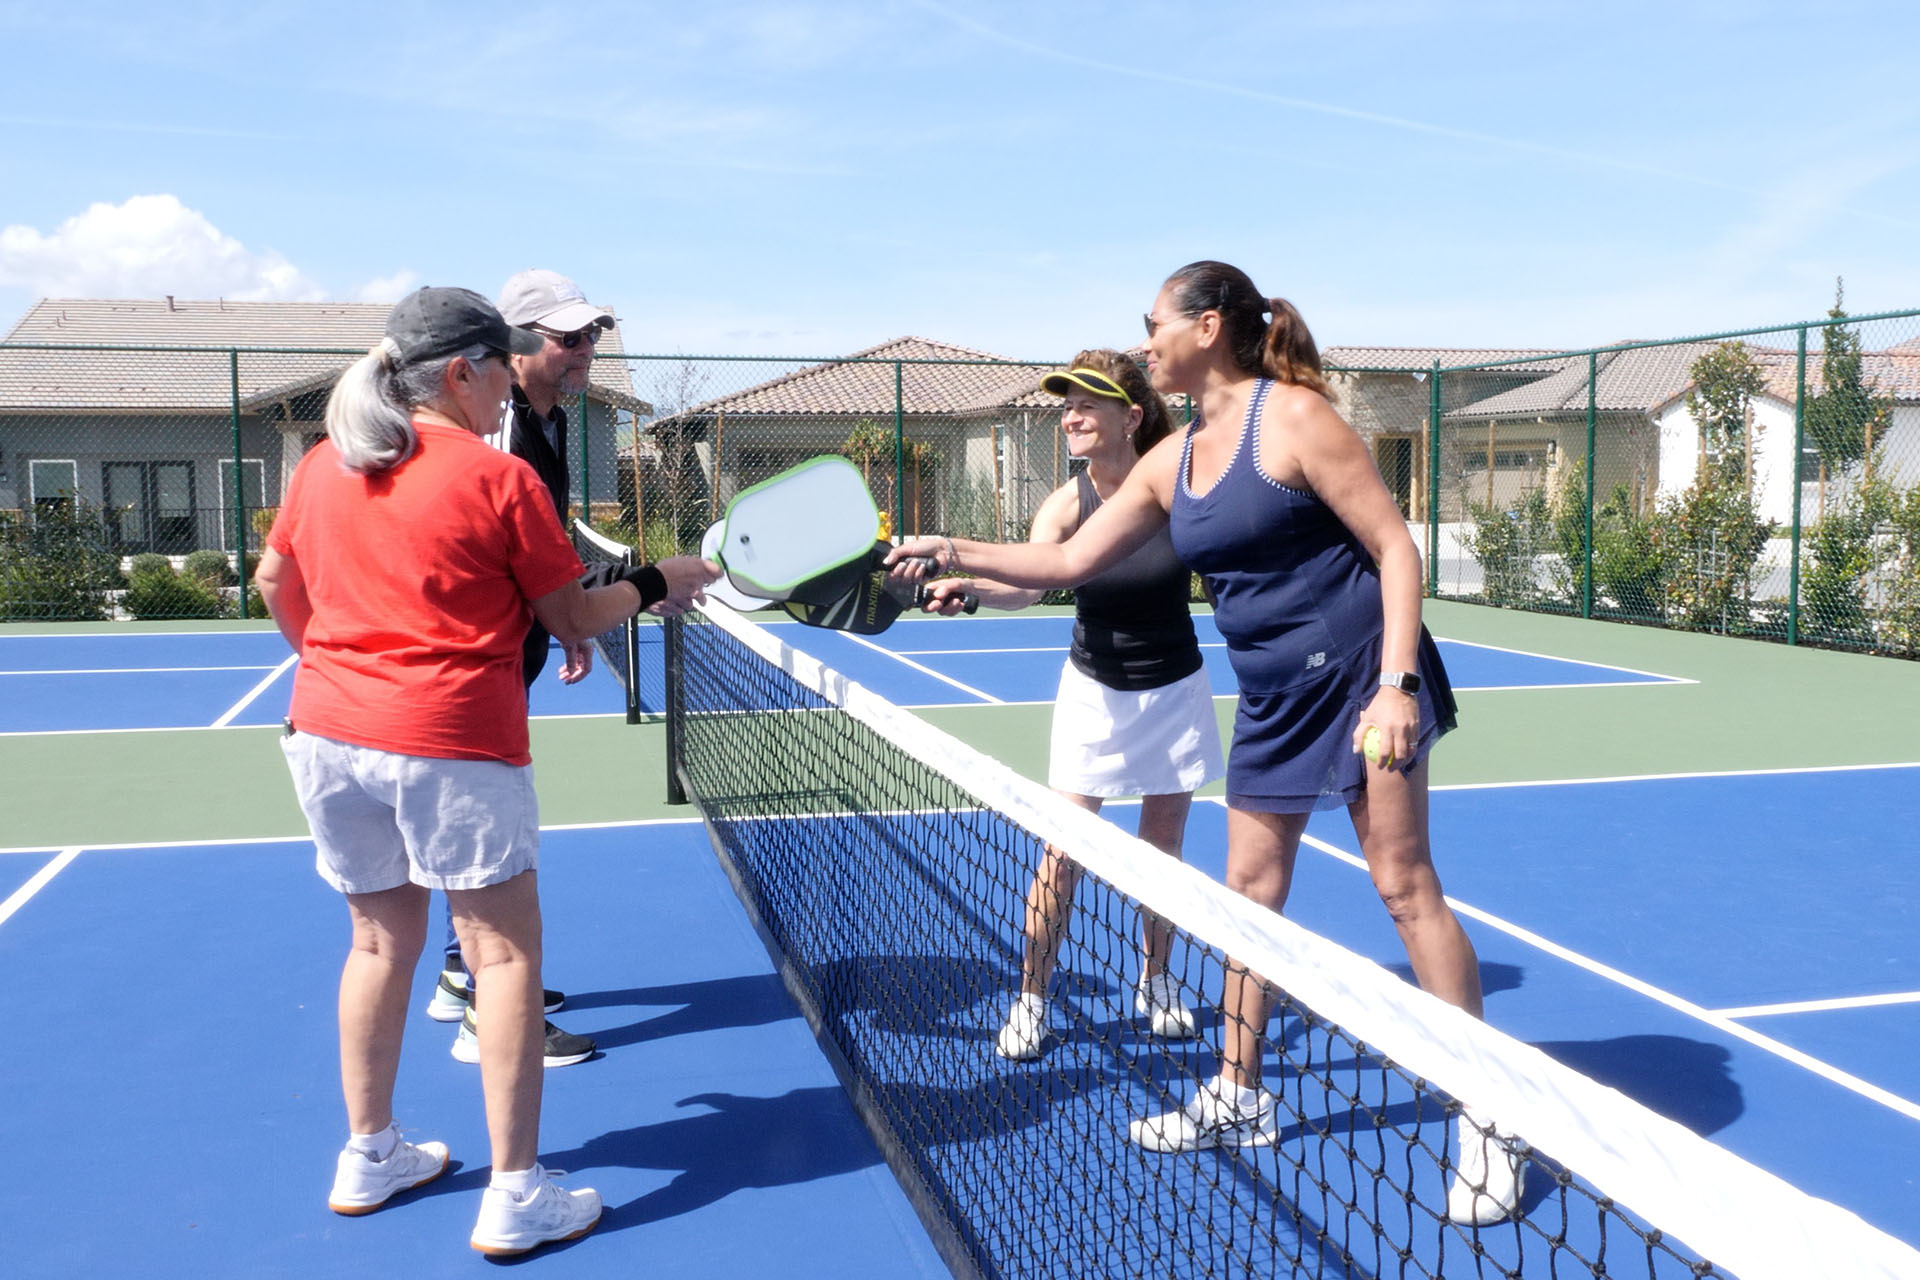 55+ community residents playing pickleball